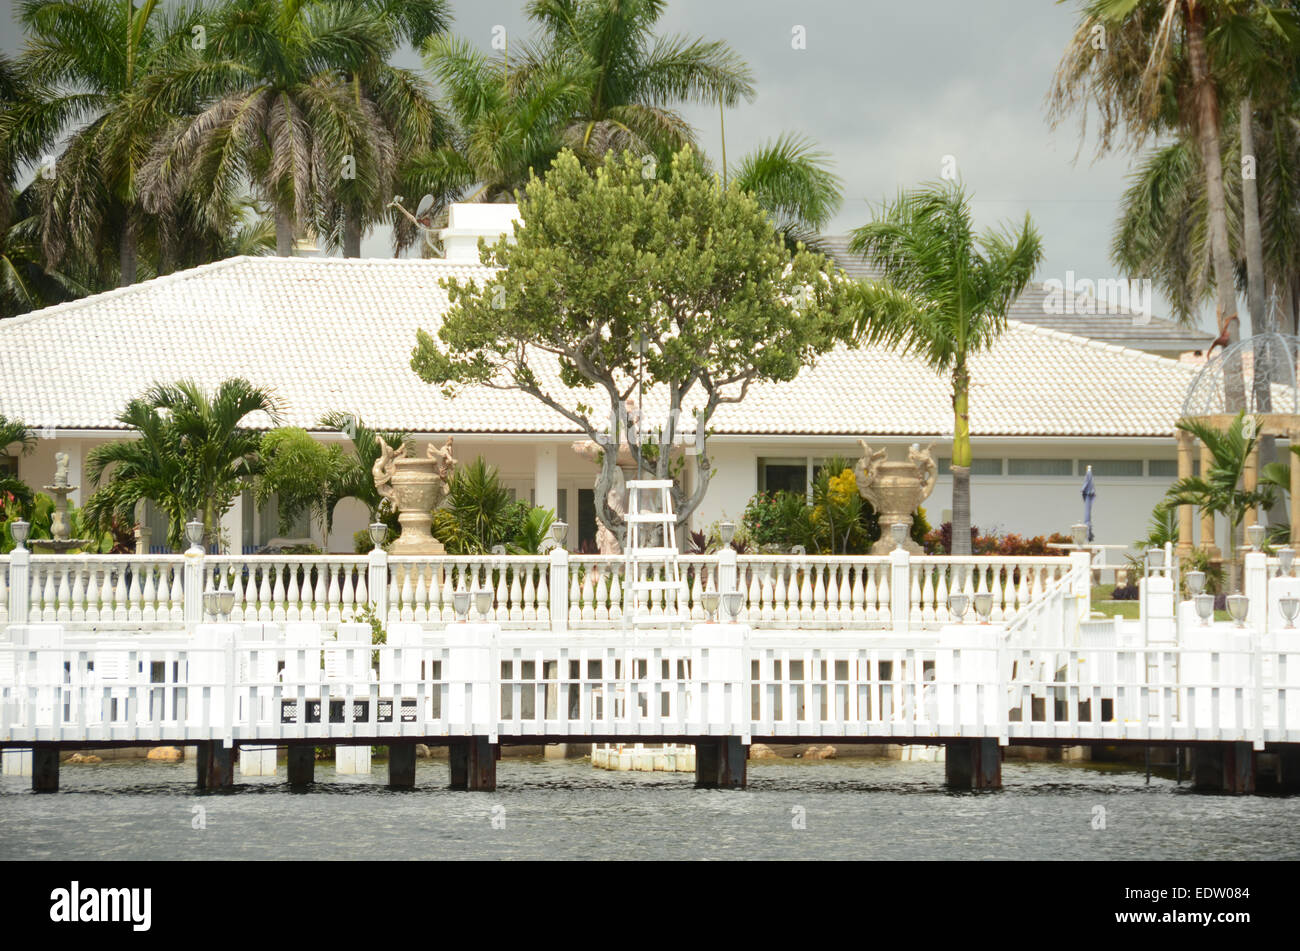 Expensive waterfront home in tropical Florida Stock Photo